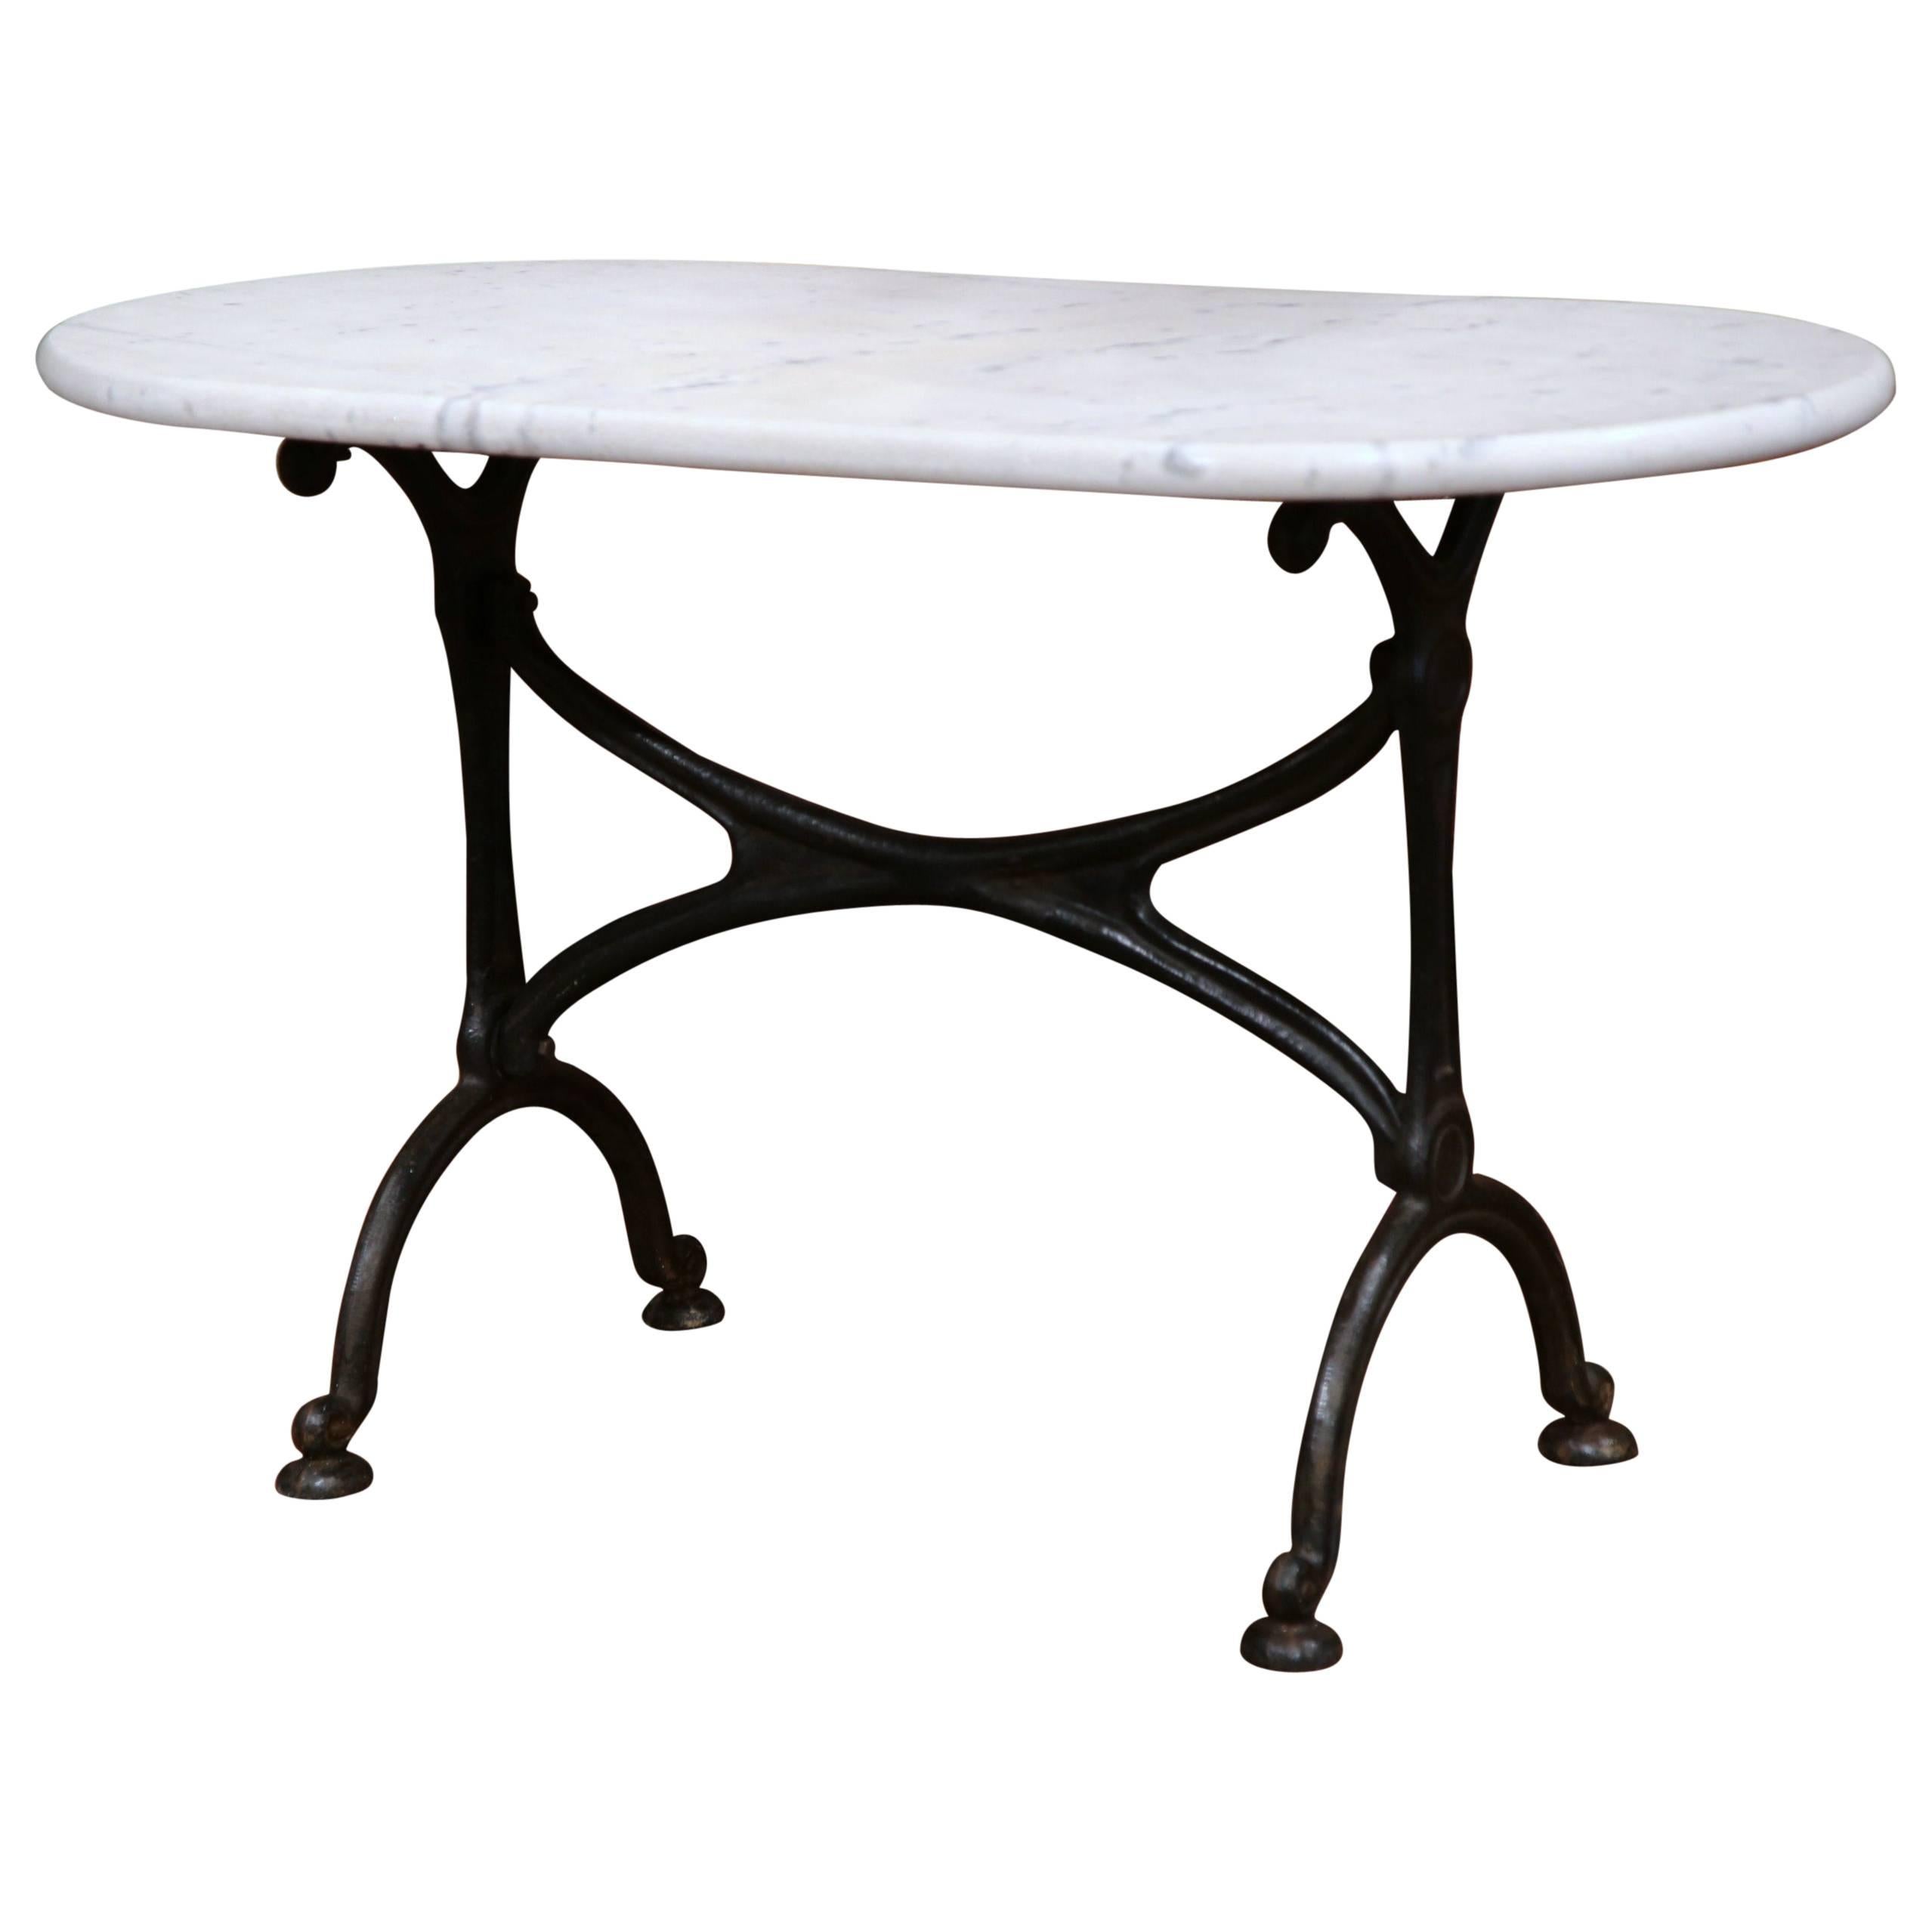 Early 20th Century French Iron and Marble Oval Bistrot Table from Paris